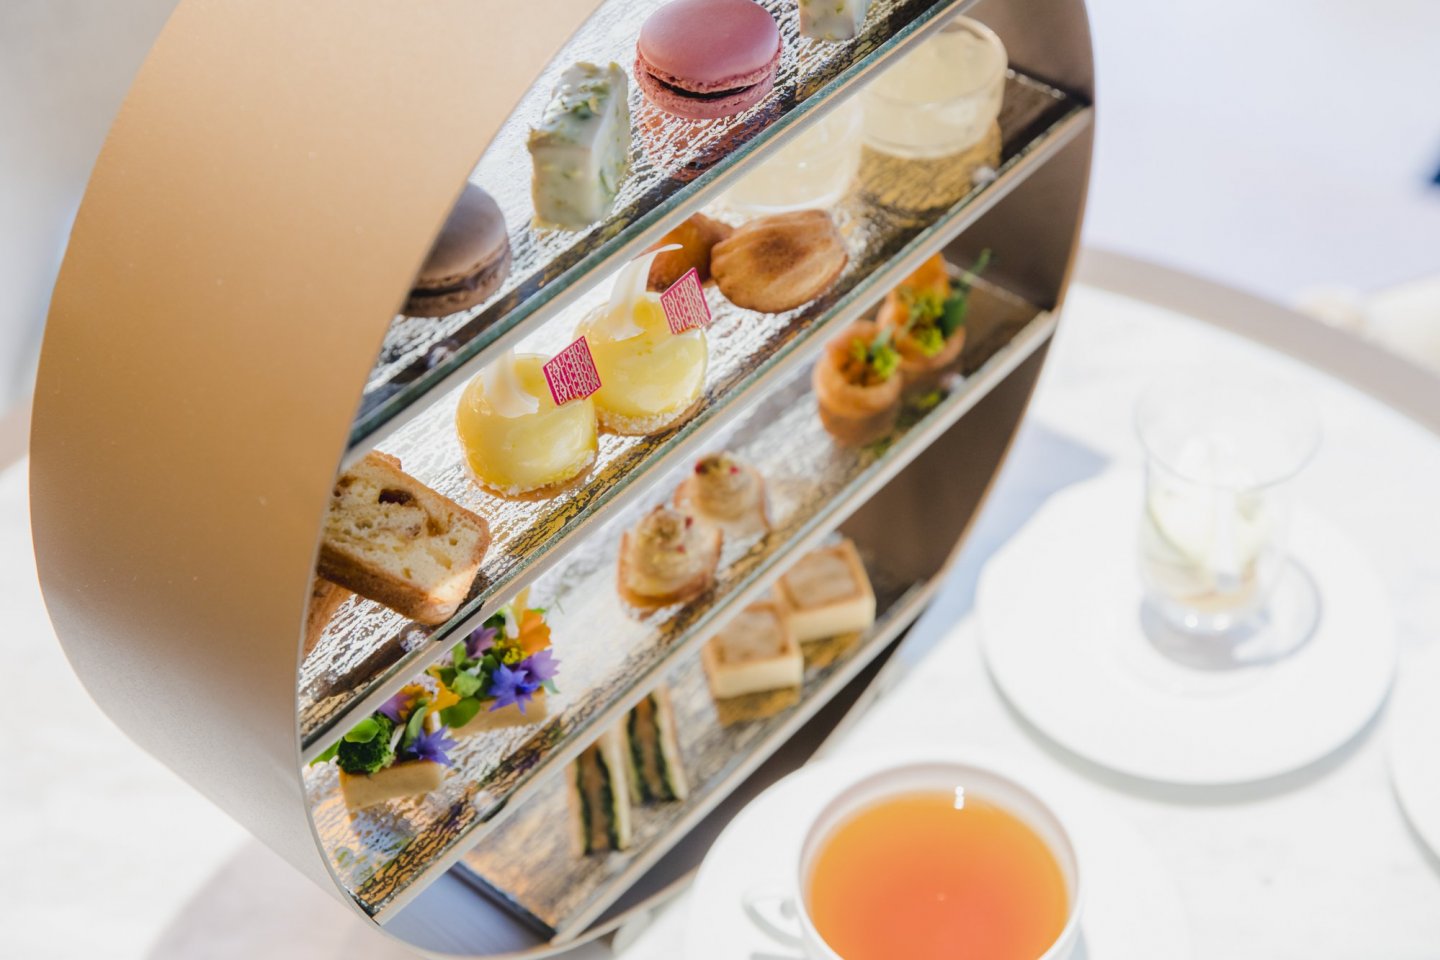 The afternoon tea incorporates various flavors (and vibrant colors!) of summer